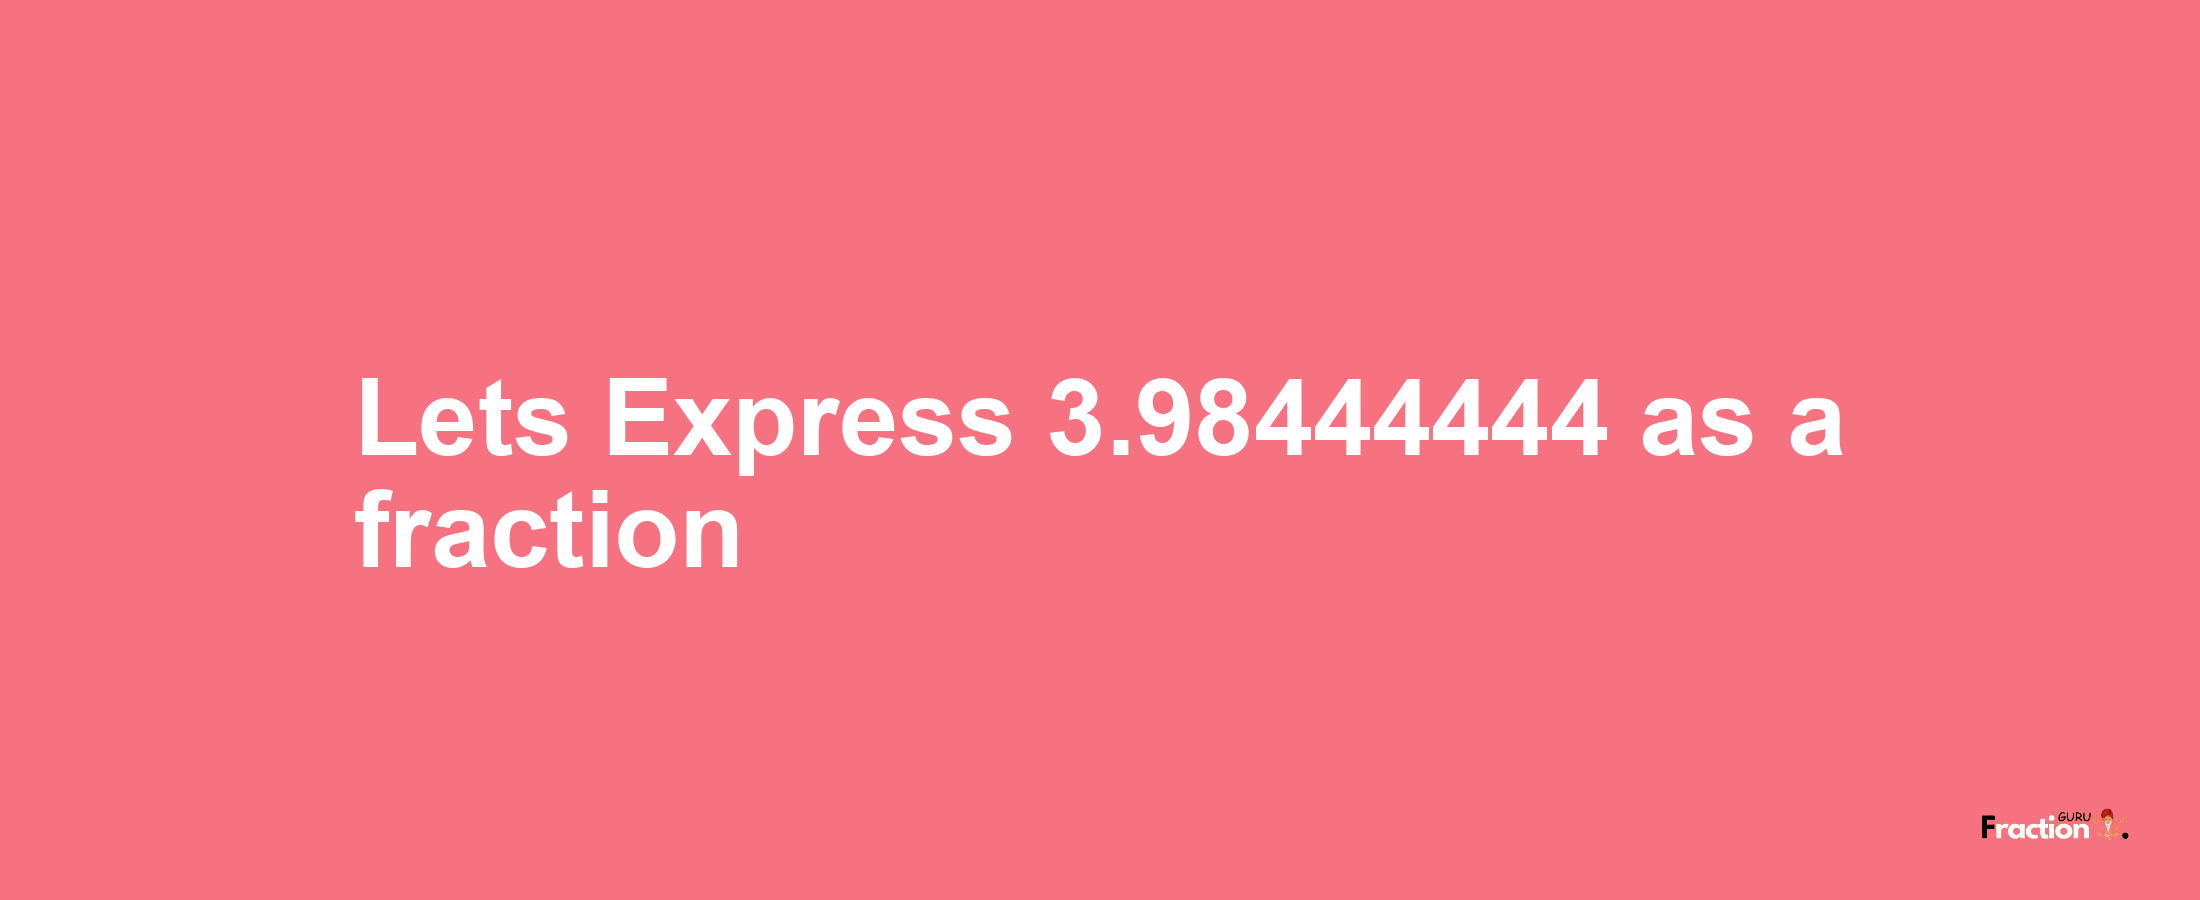 Lets Express 3.98444444 as afraction